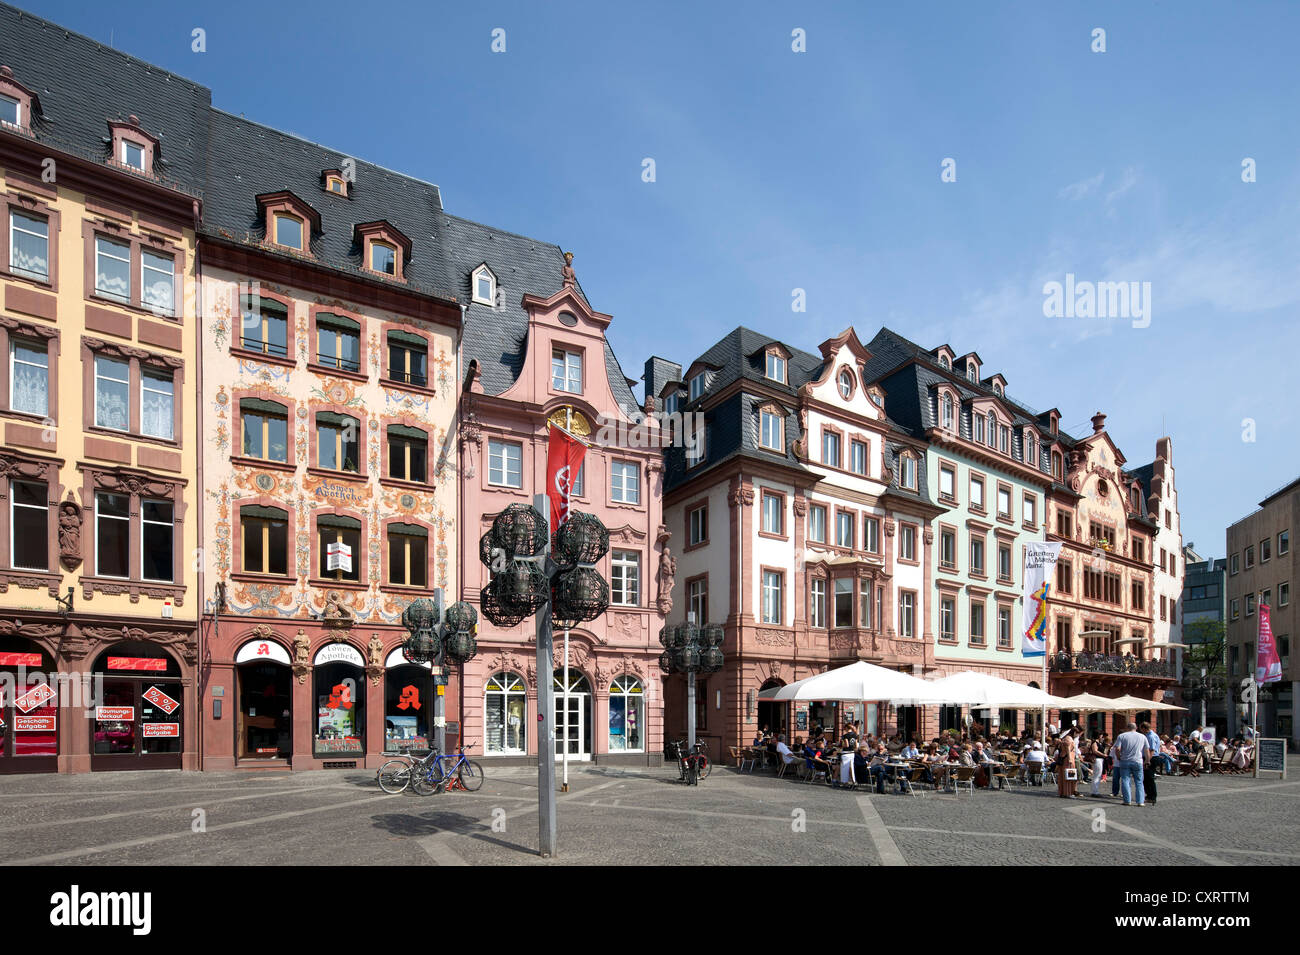 Restored town houses on Markt square, commercial buildings, Mainz, Rhineland-Palatinate, Germany, Europe, PublicGround Stock Photo